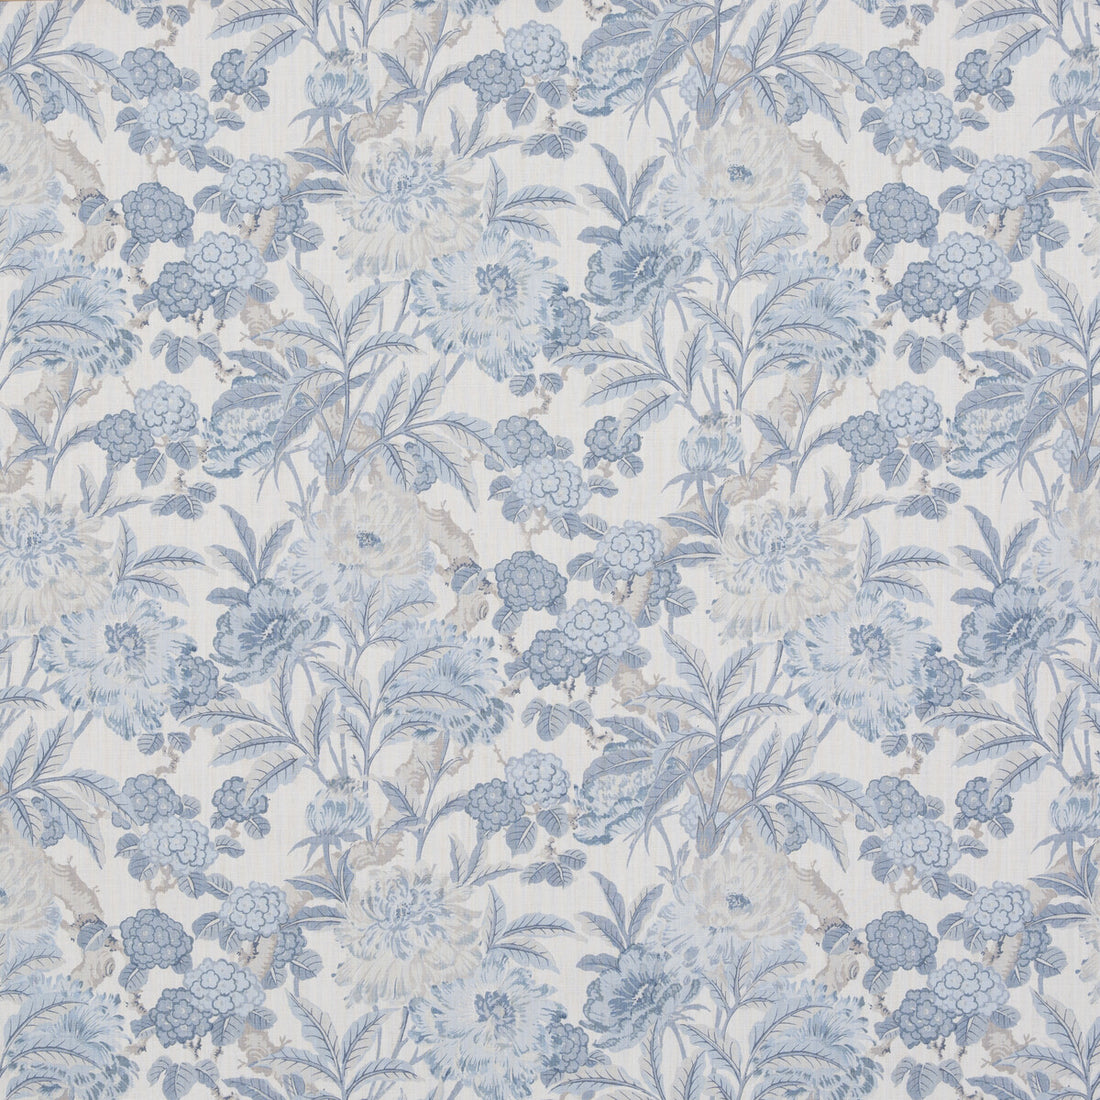 Summer Peony fabric in blue color - pattern BP10950.1.0 - by G P &amp; J Baker in the Ashmore collection